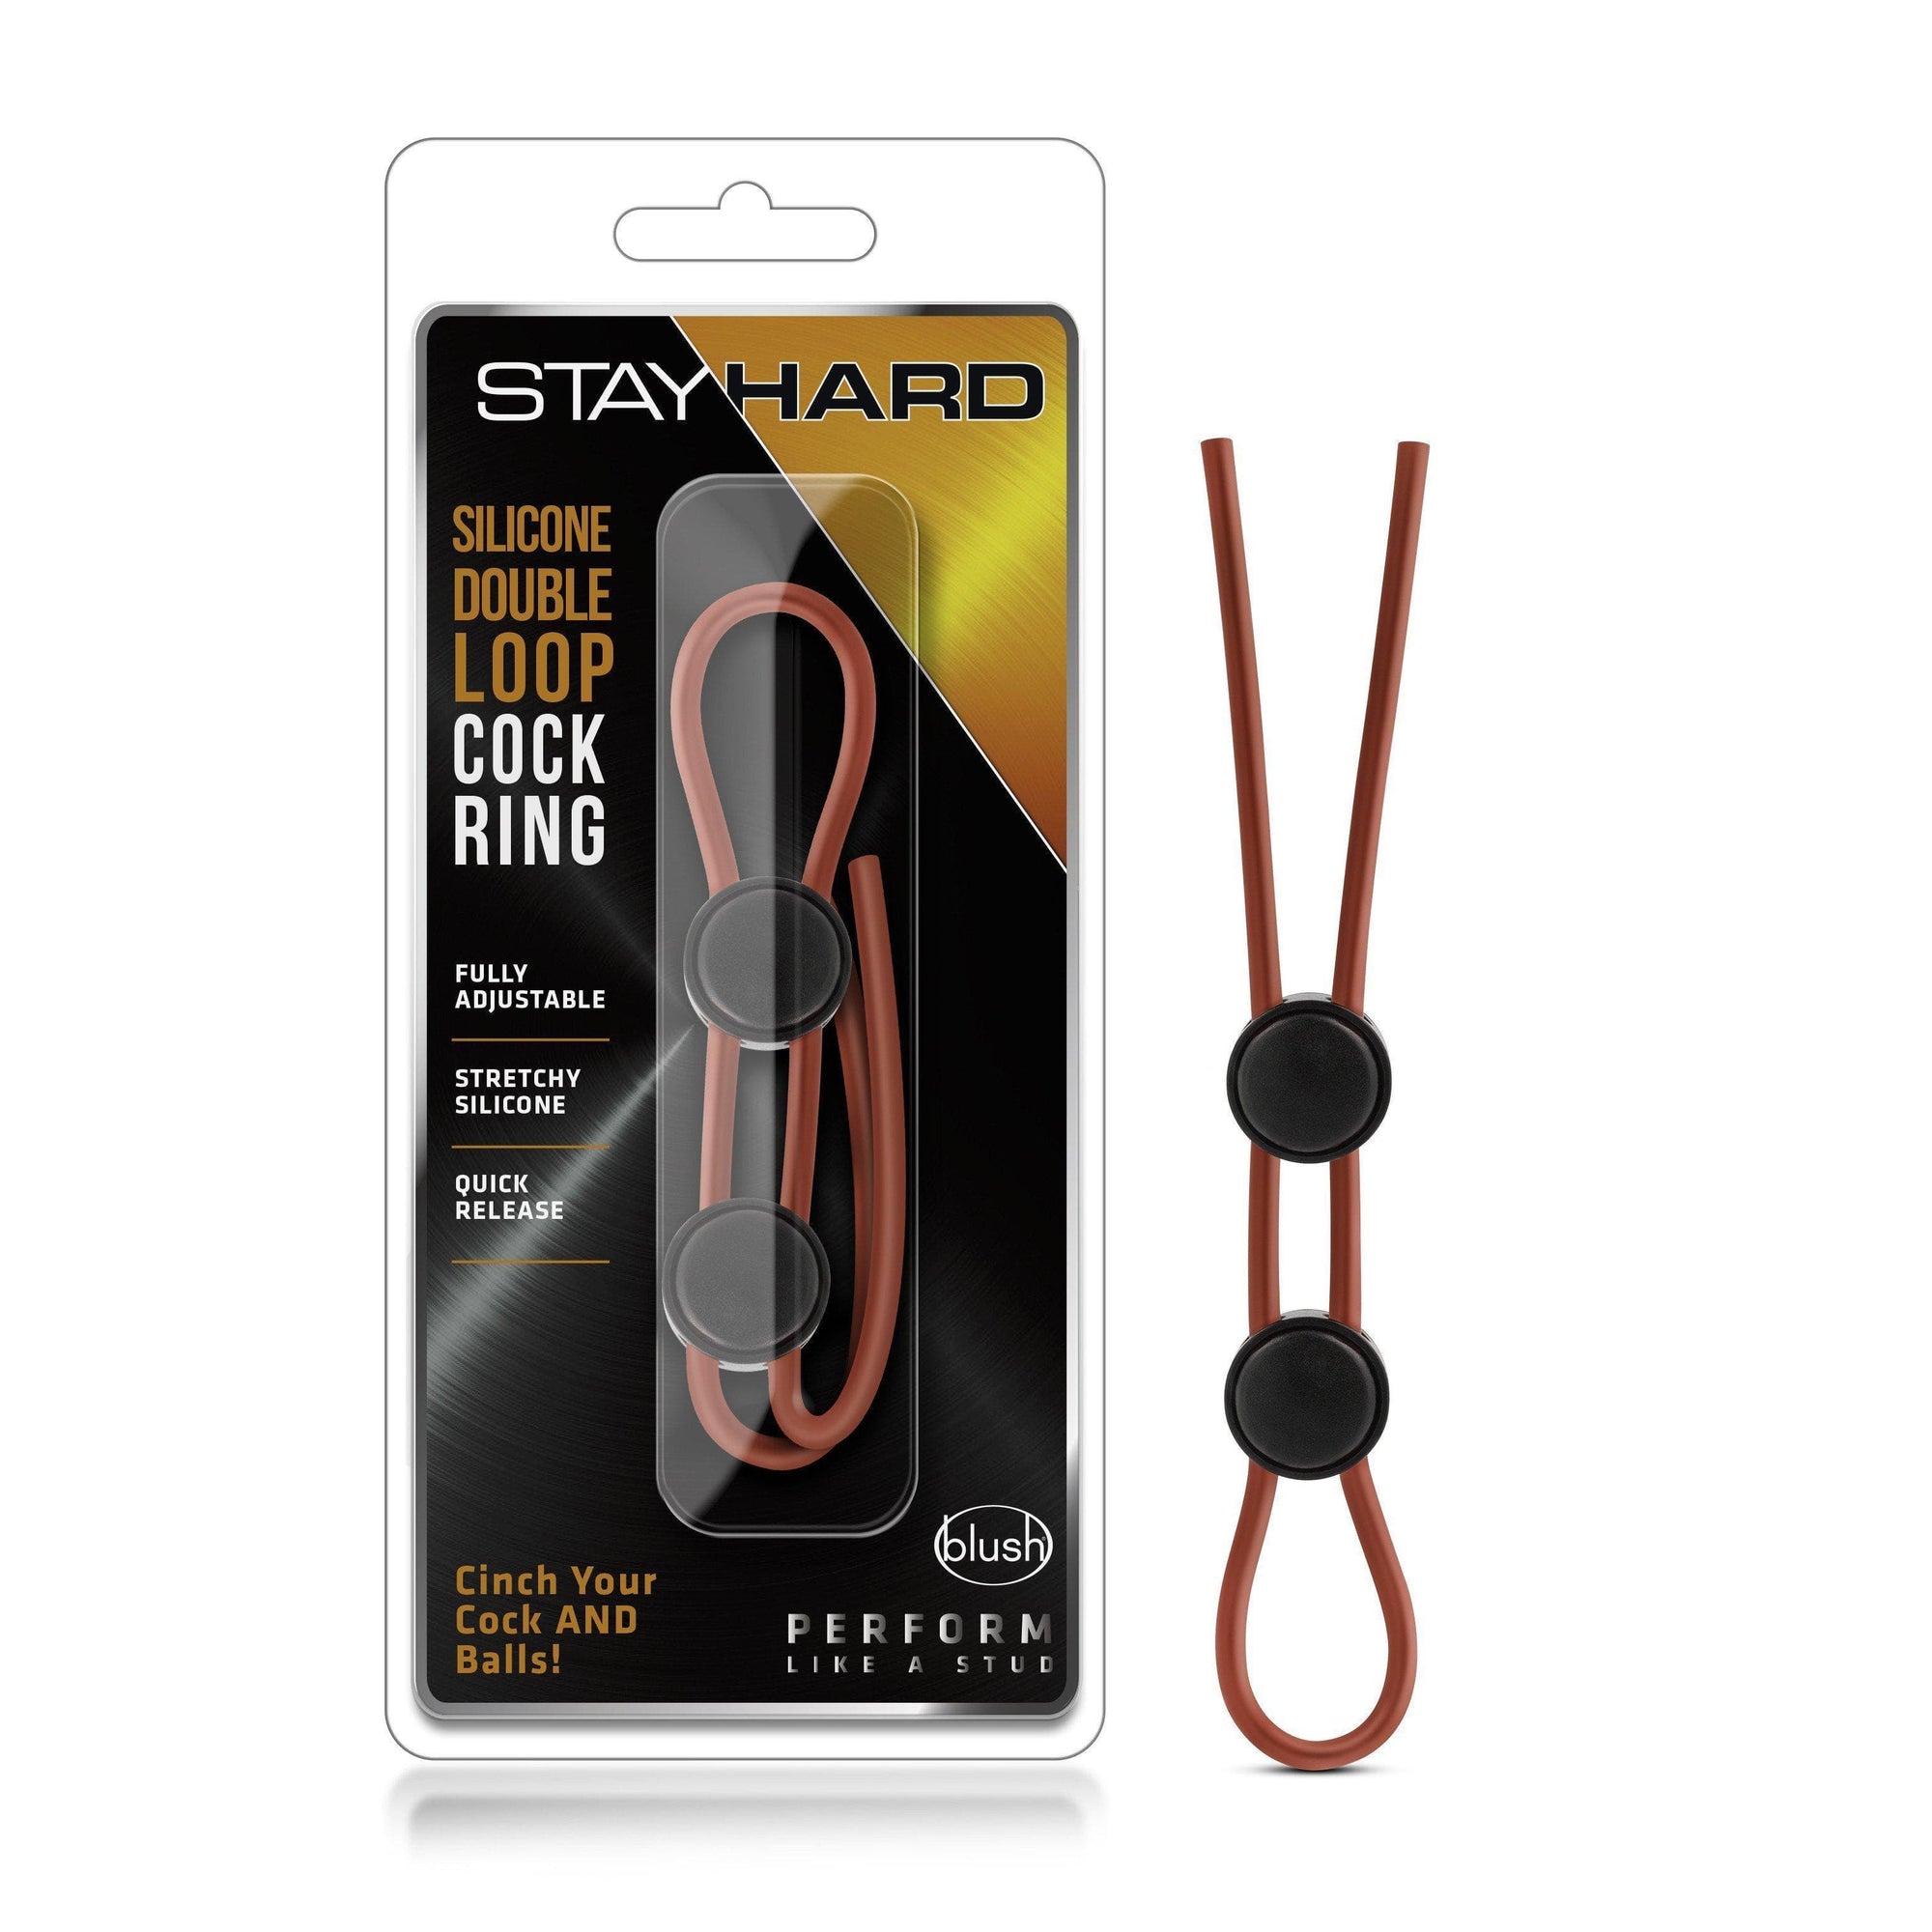 Stay Hard Silicone Double Loop Penis and Scrotum Erection Enhancement Lasso Ring - Romantic Blessings